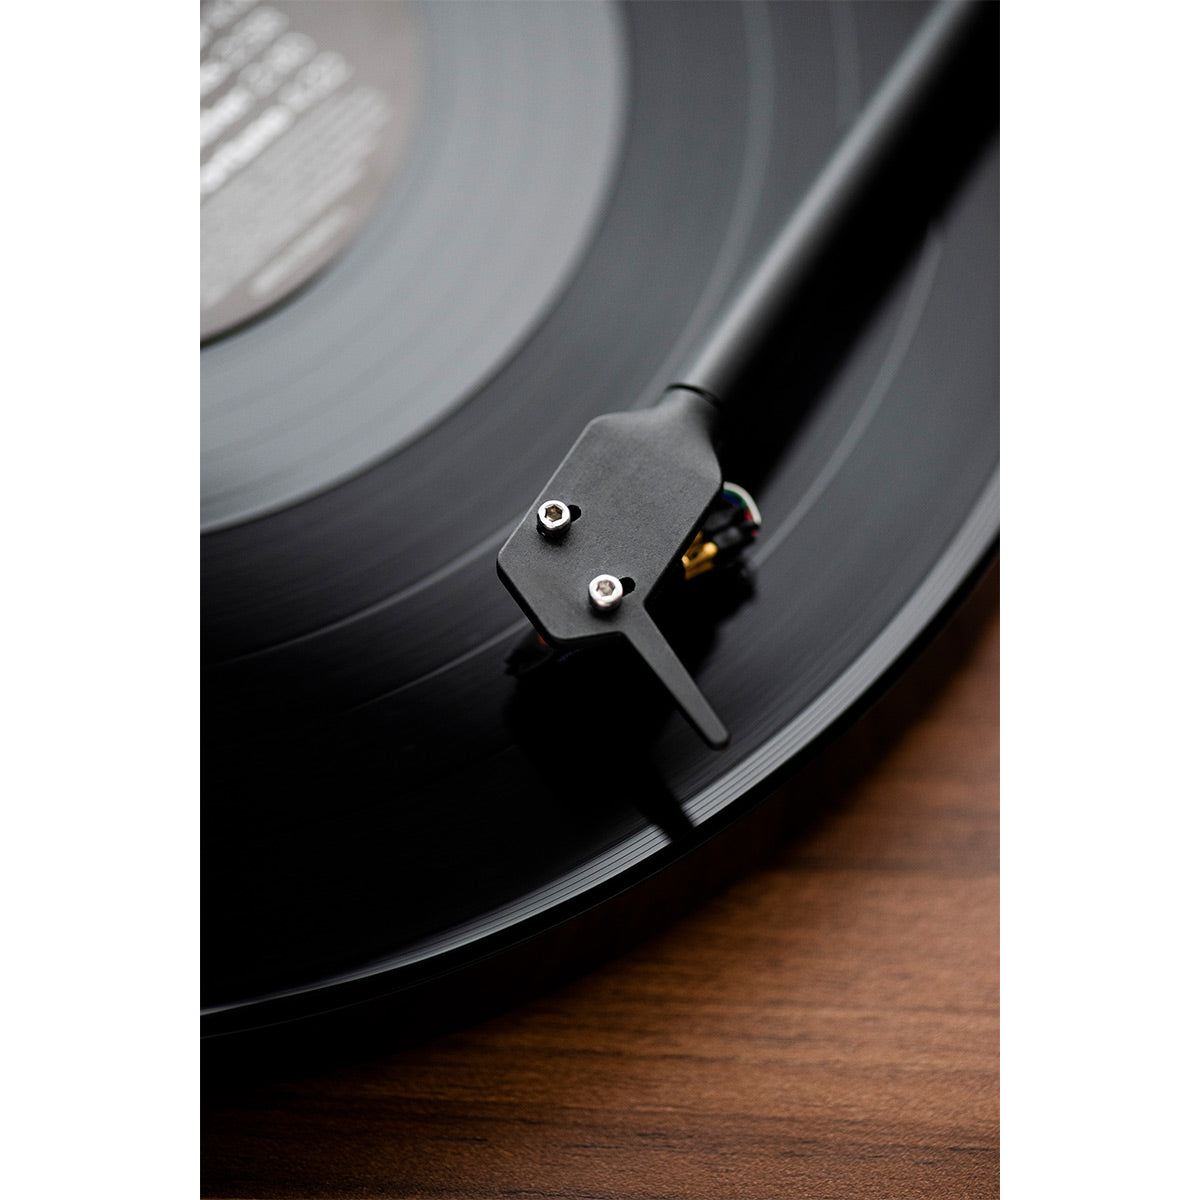 Pro-Ject E1 BT Plug & Play Turntable with built-in Phono Preamp & BT Transmitter (Black)